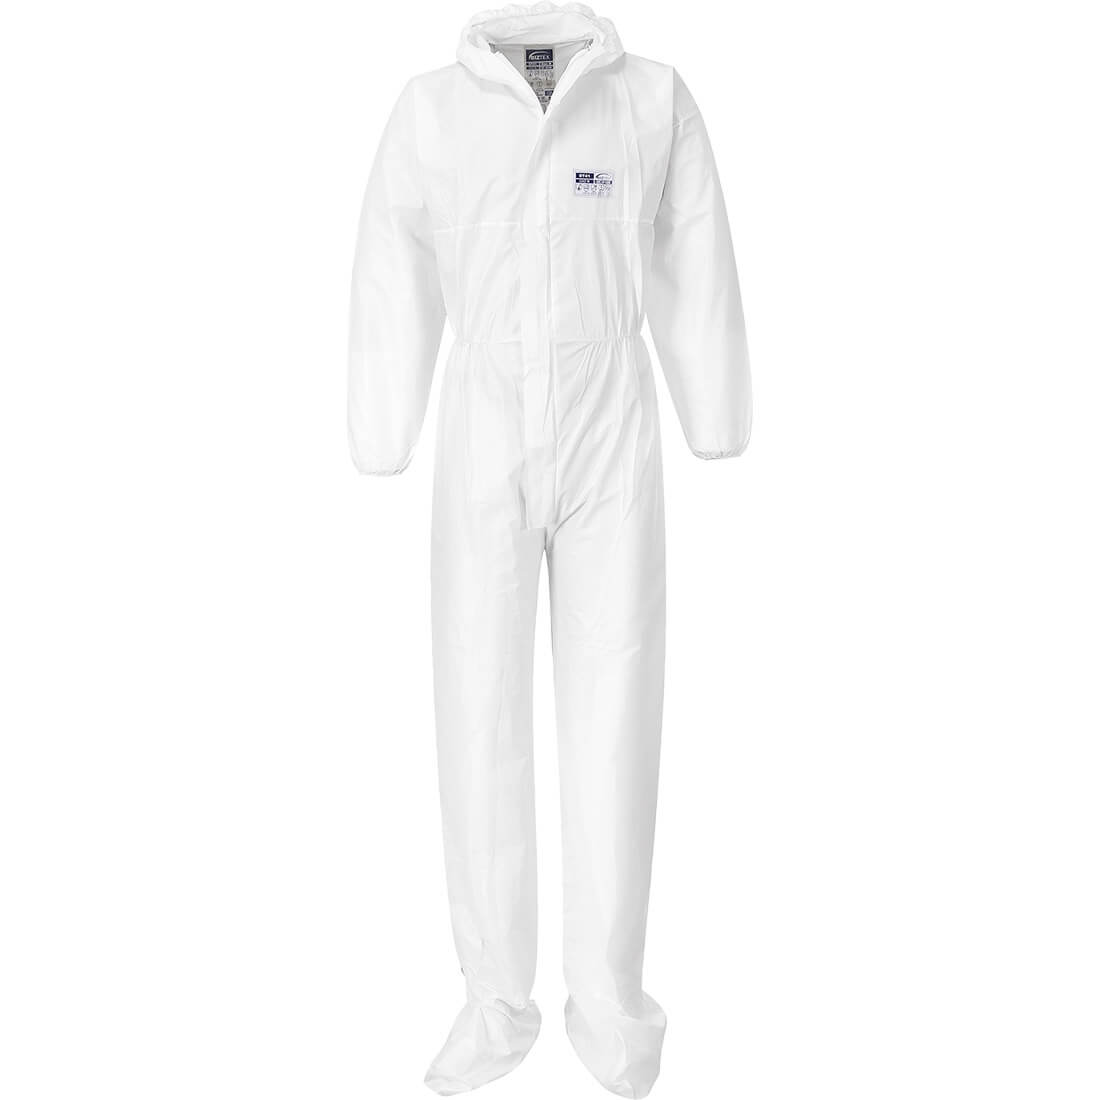 BizTex® Microporous Coverall with Boot covers Type 6/5 - Personal protection